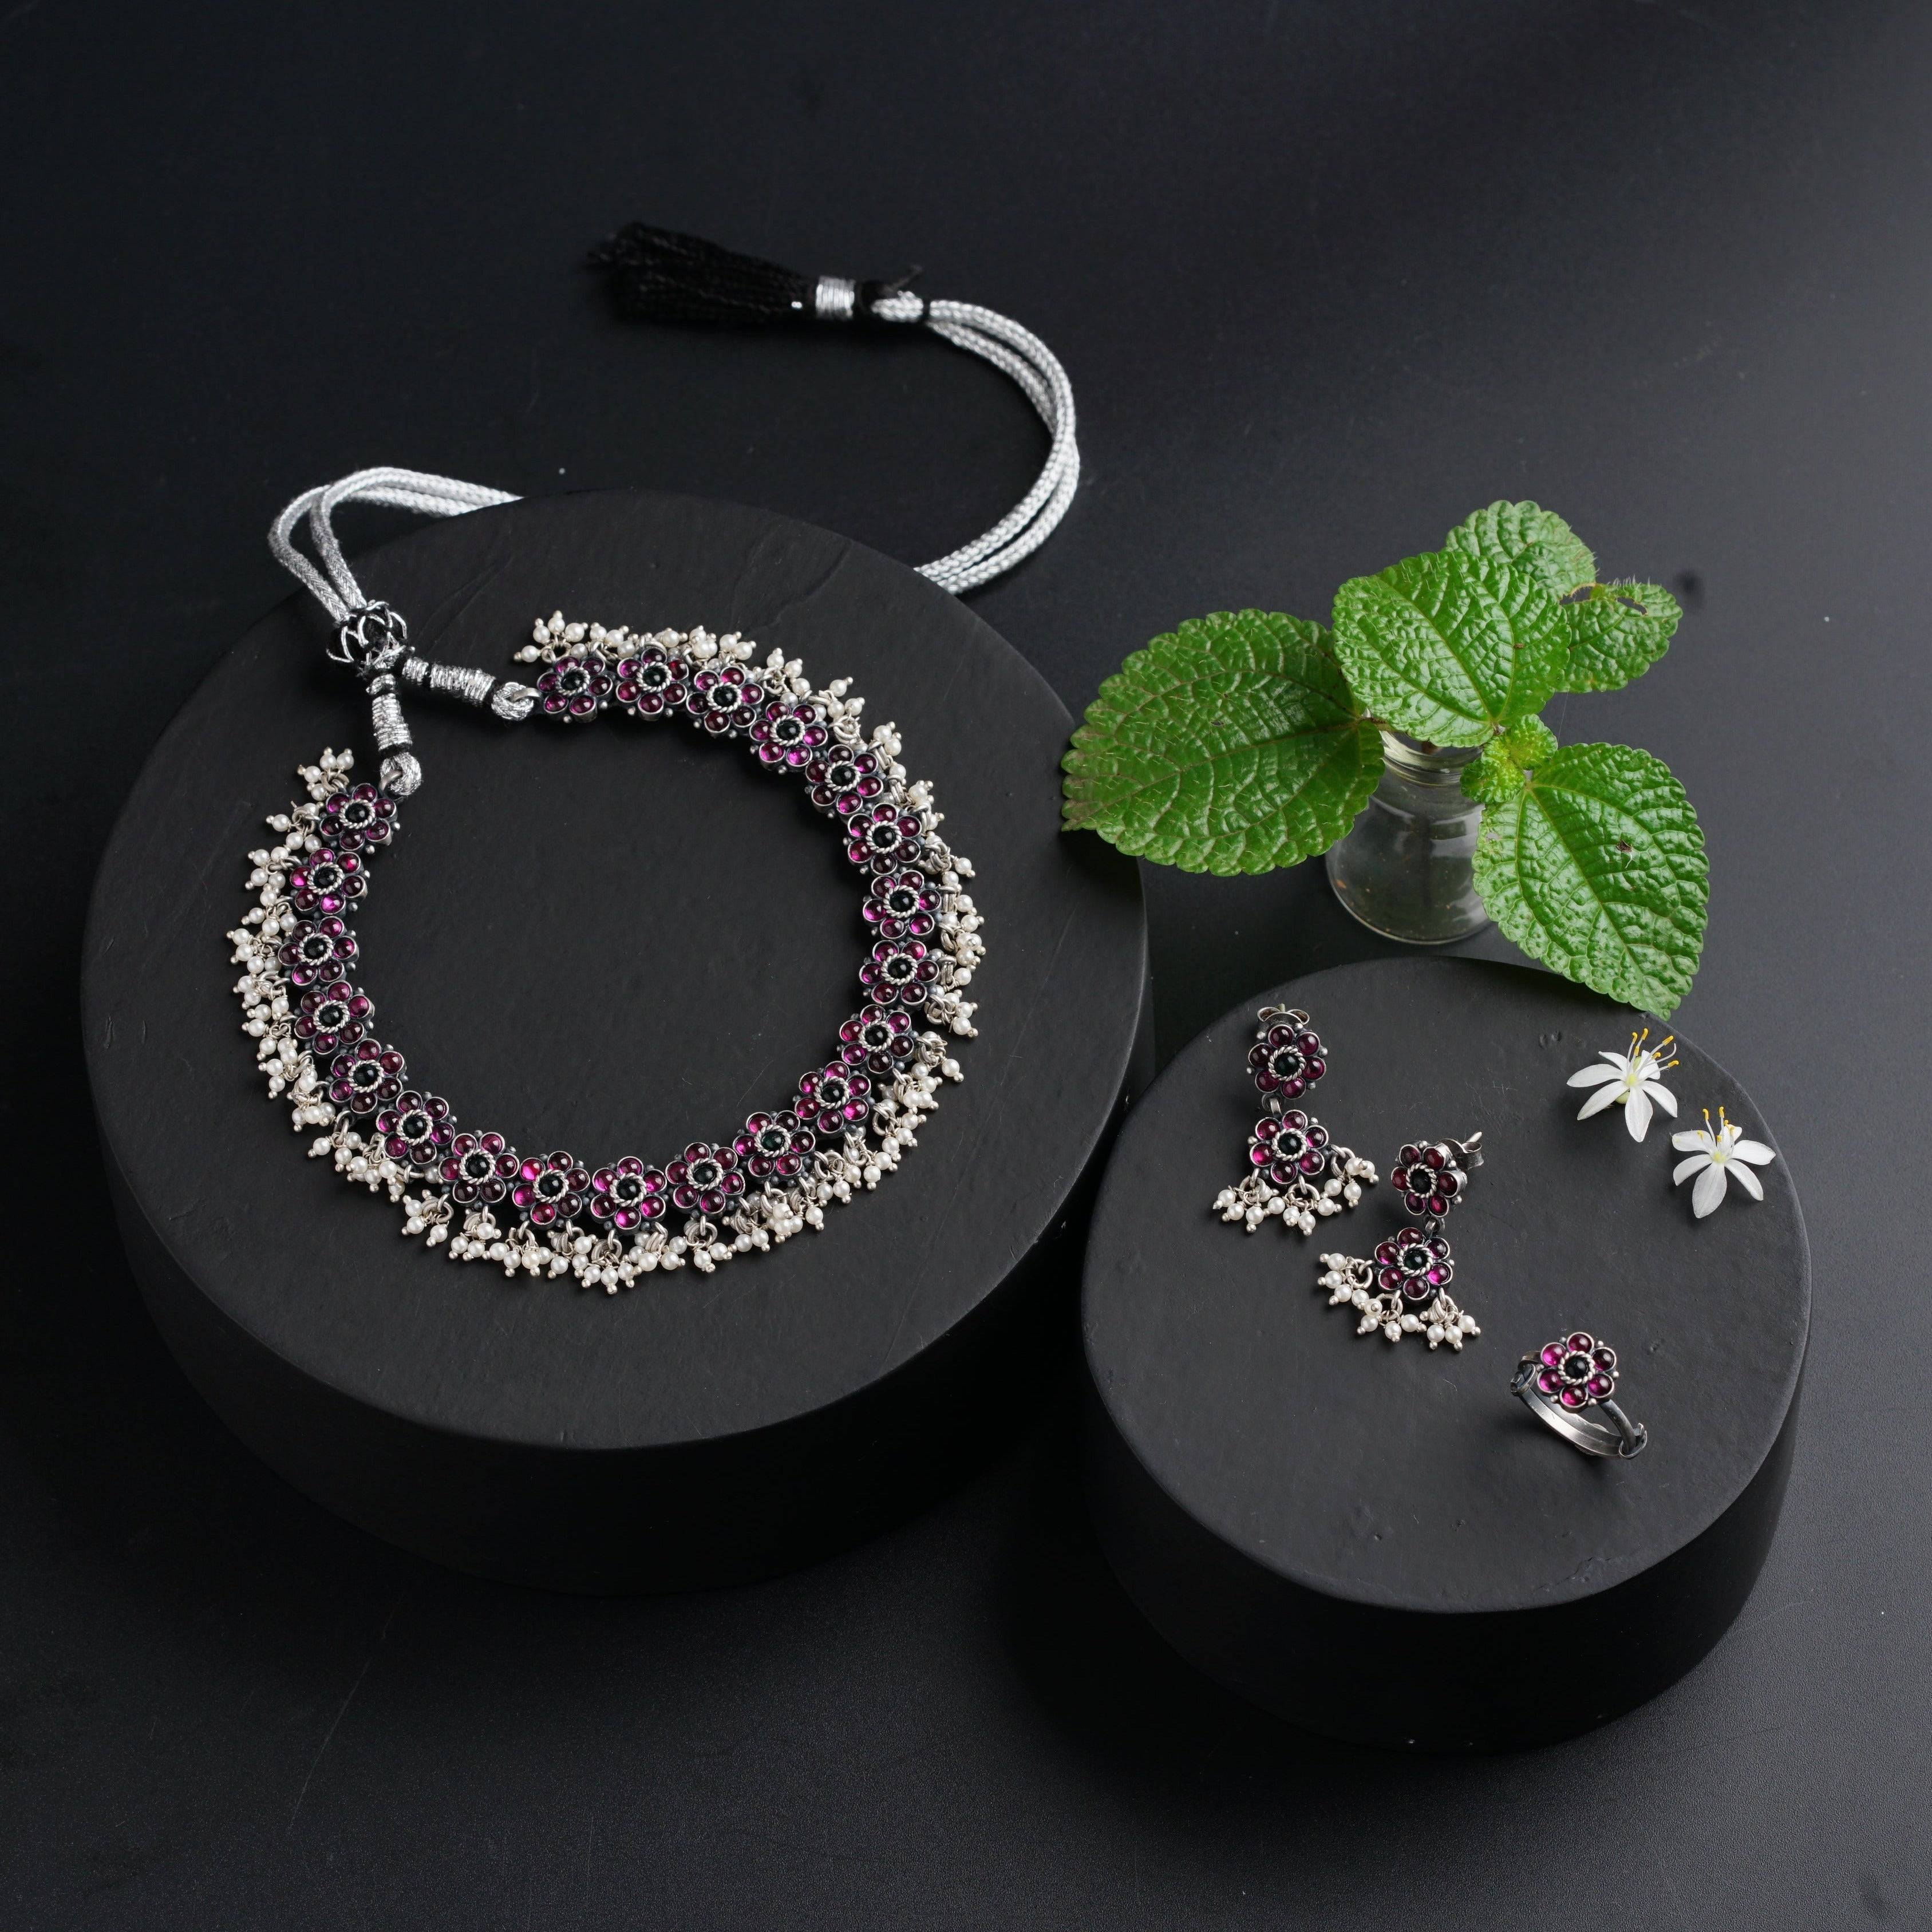 a pair of jewelry sits on a black surface